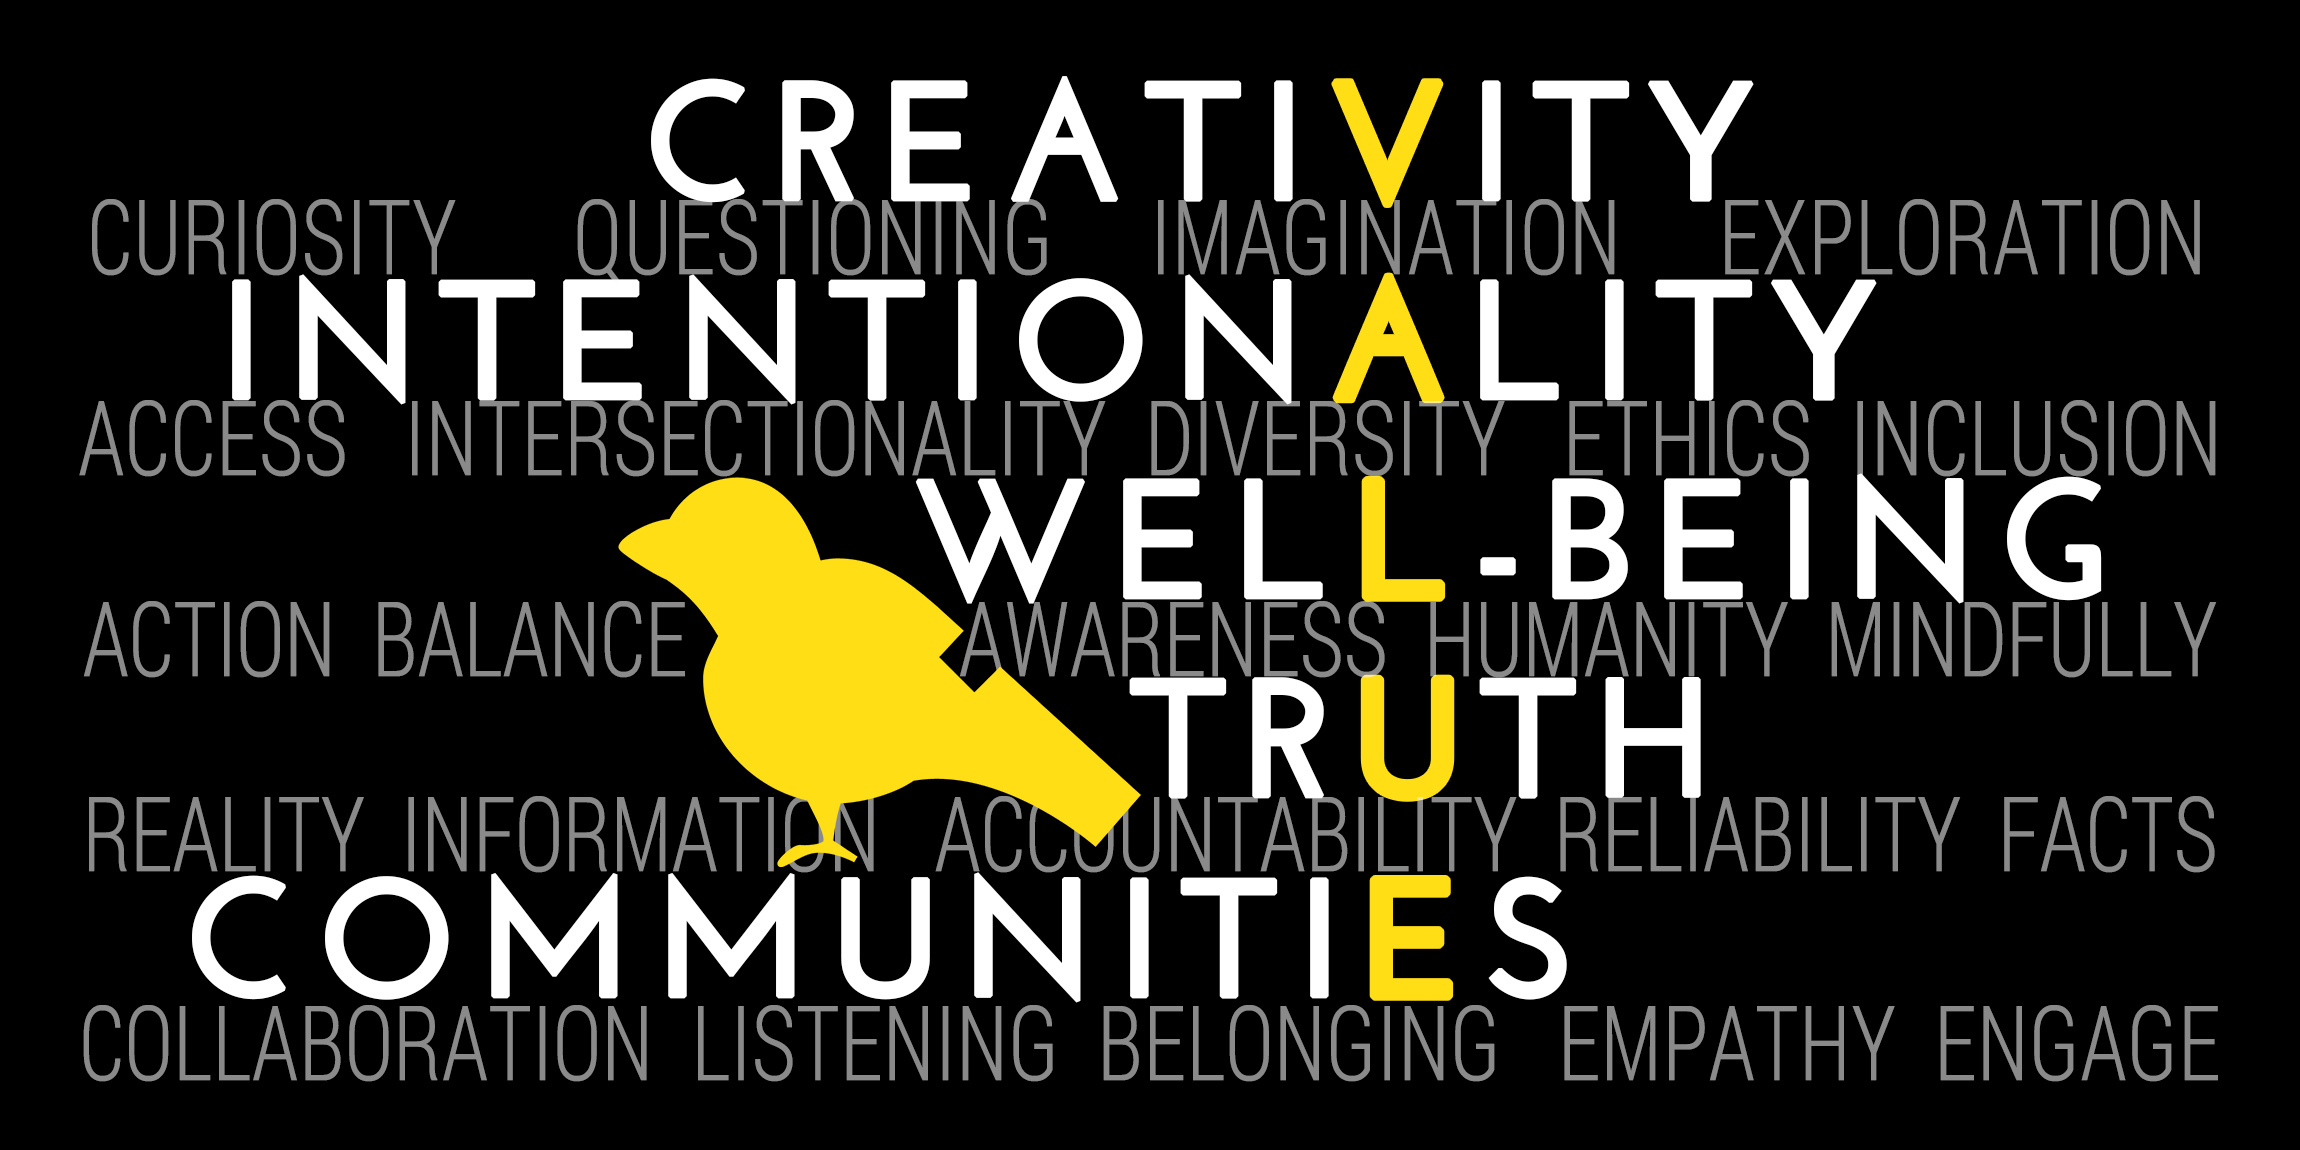 values visualization - Creativity, Intentionality, Well-Being, Truth and Community. 